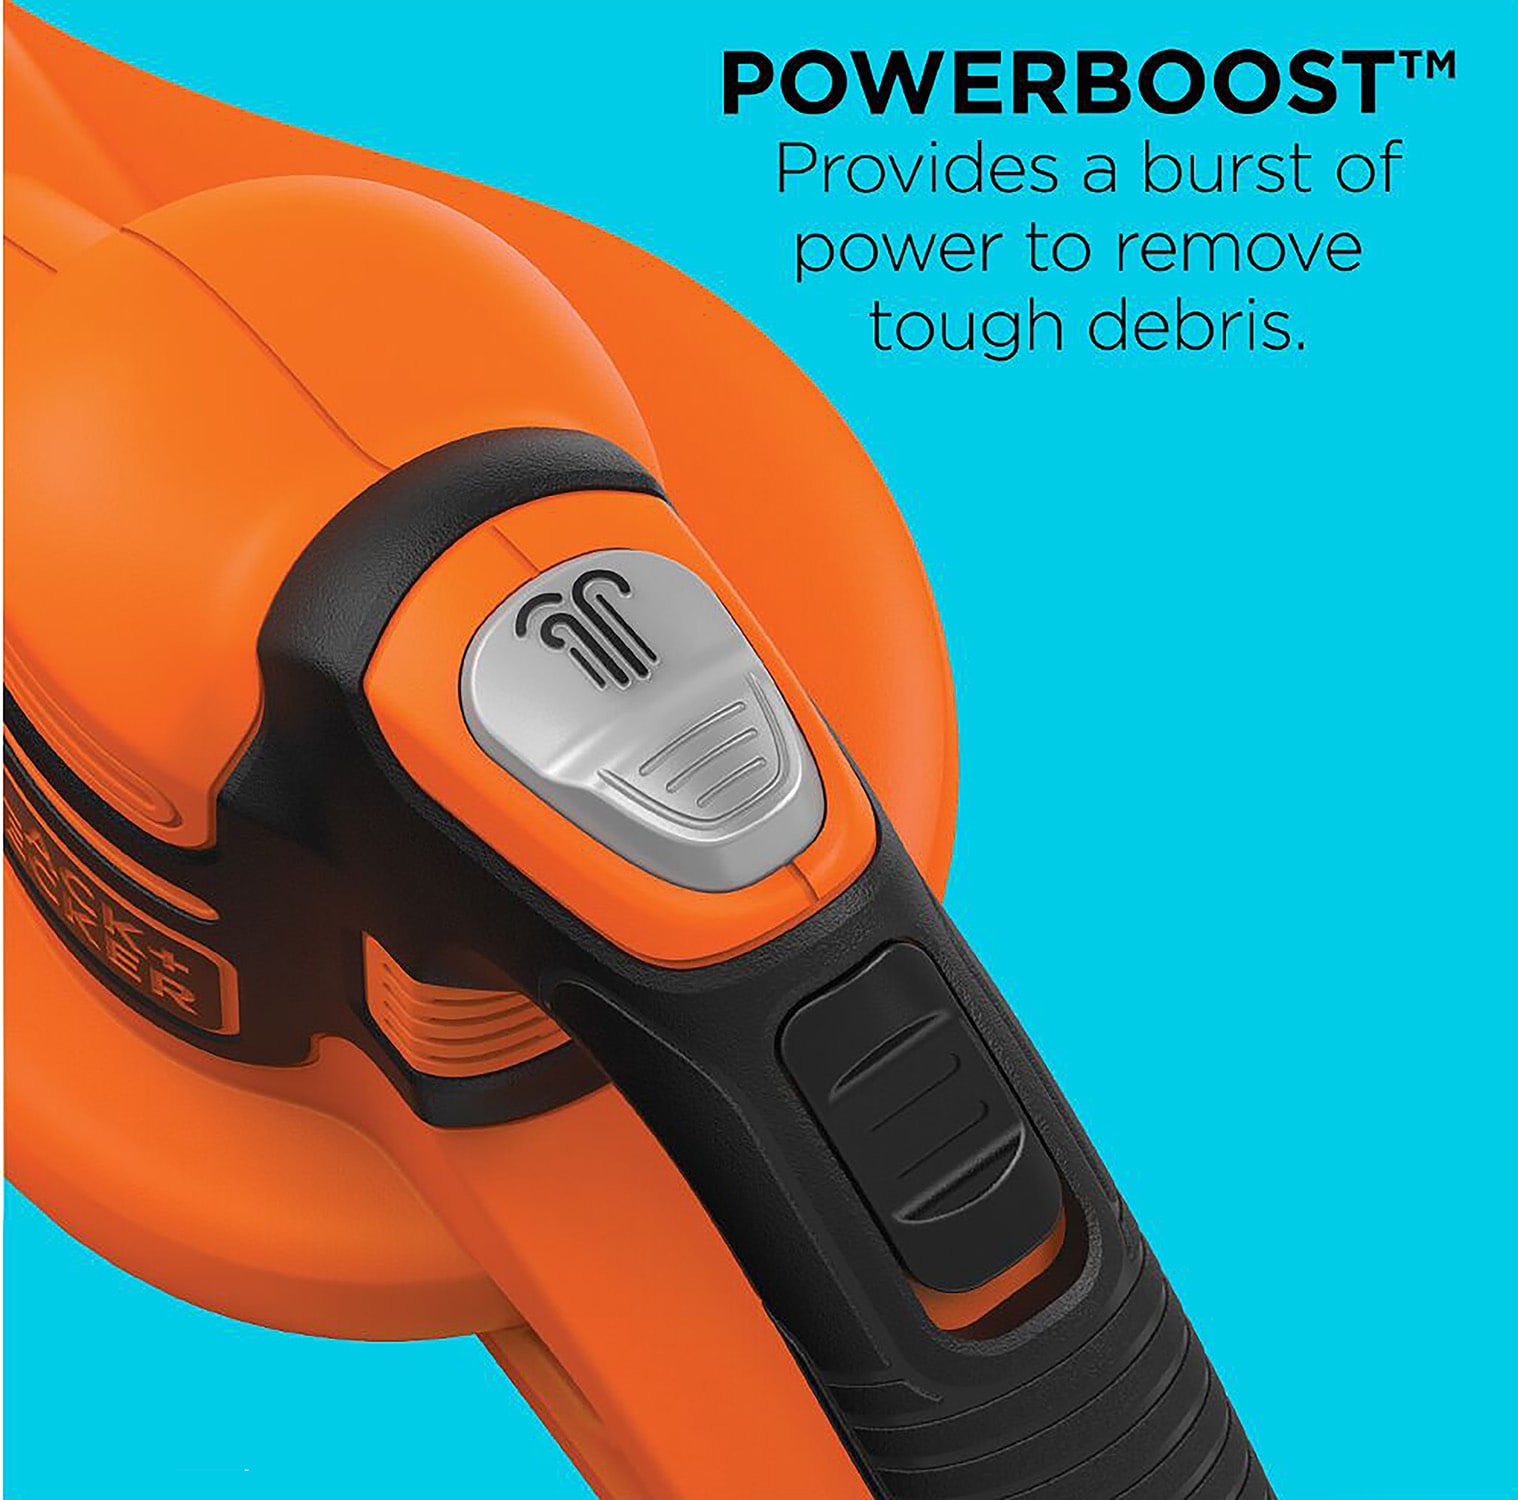 Black & Decker PowerBoost Lithium-Ion Sweeper Kit w Battery Charger LSW321